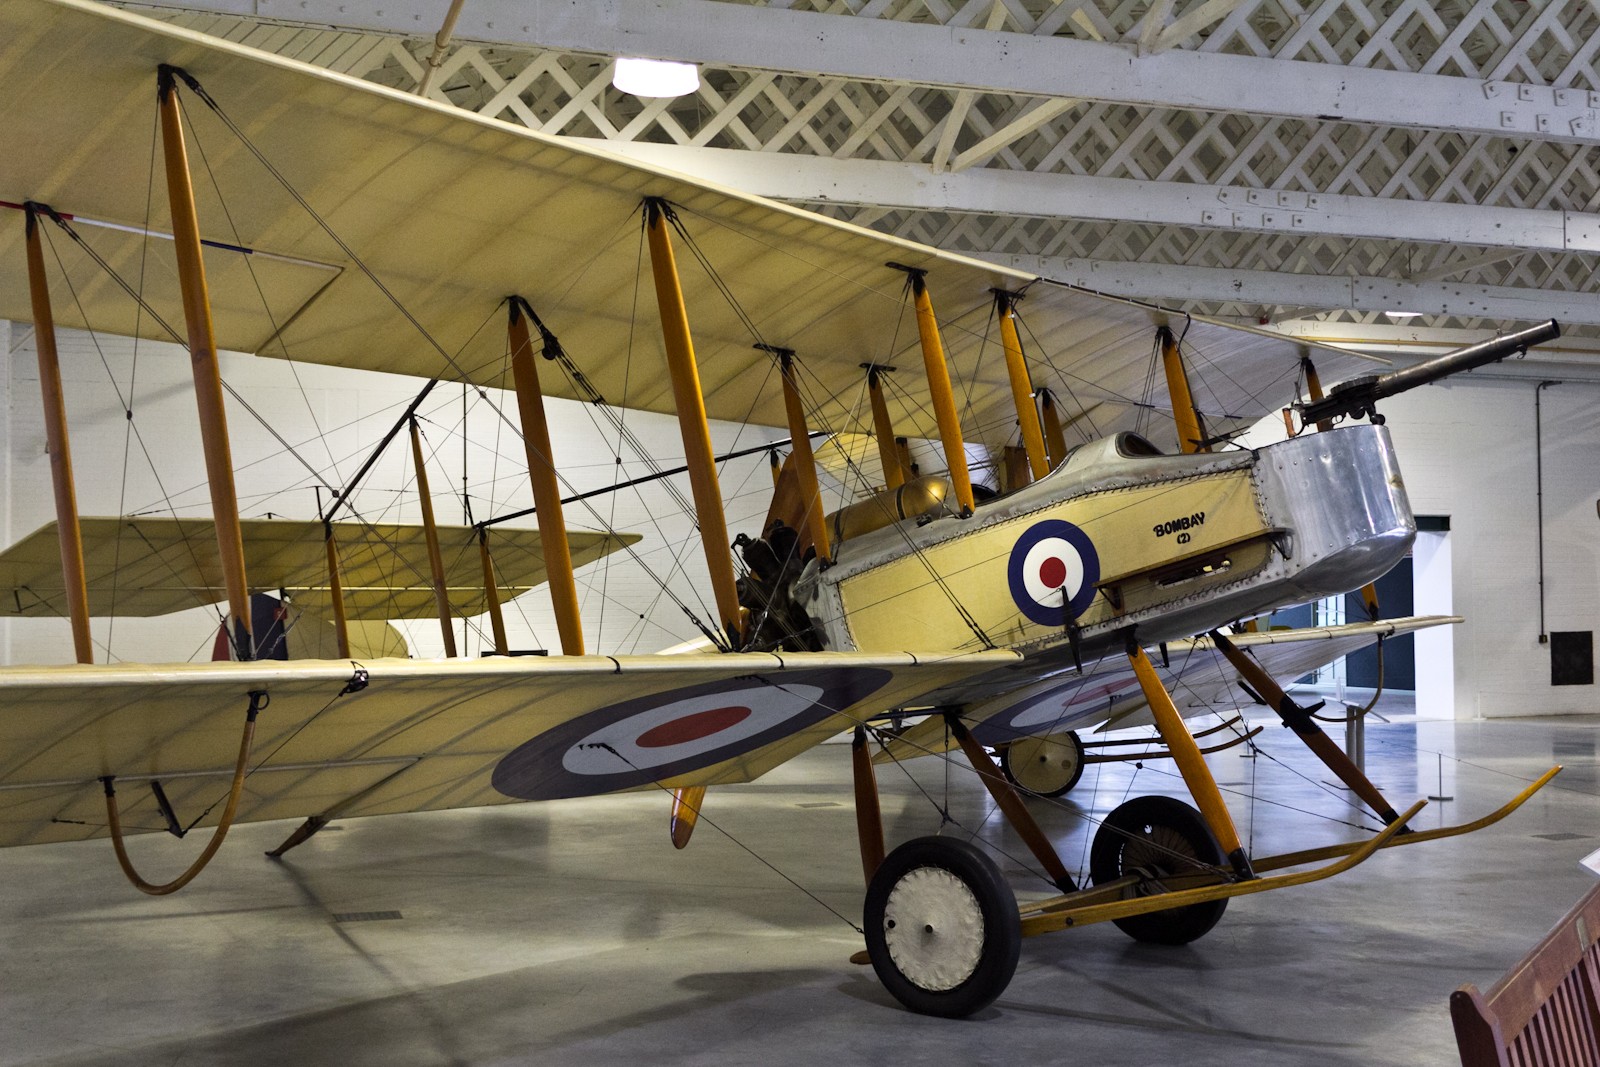 Iconic Planes of World War I (Part 3)